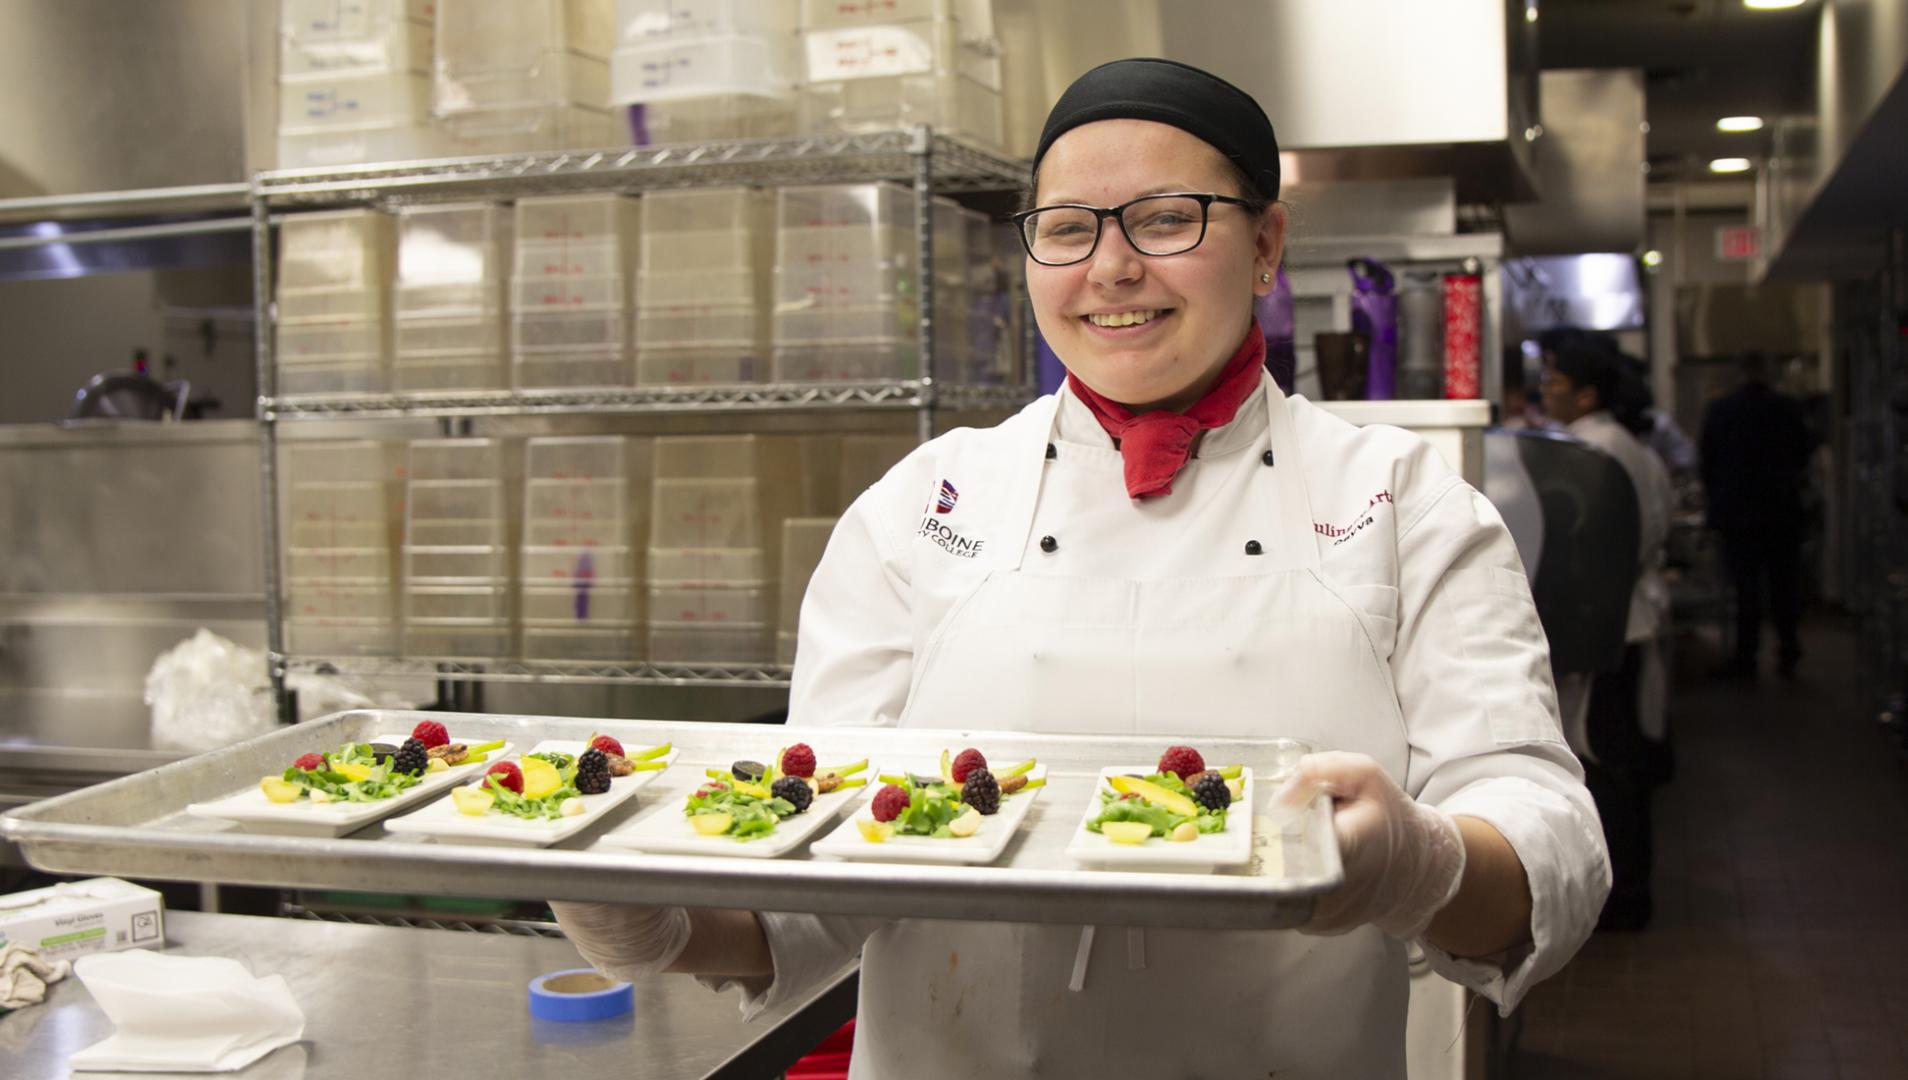 Culinary Arts student holding a tray of desserts